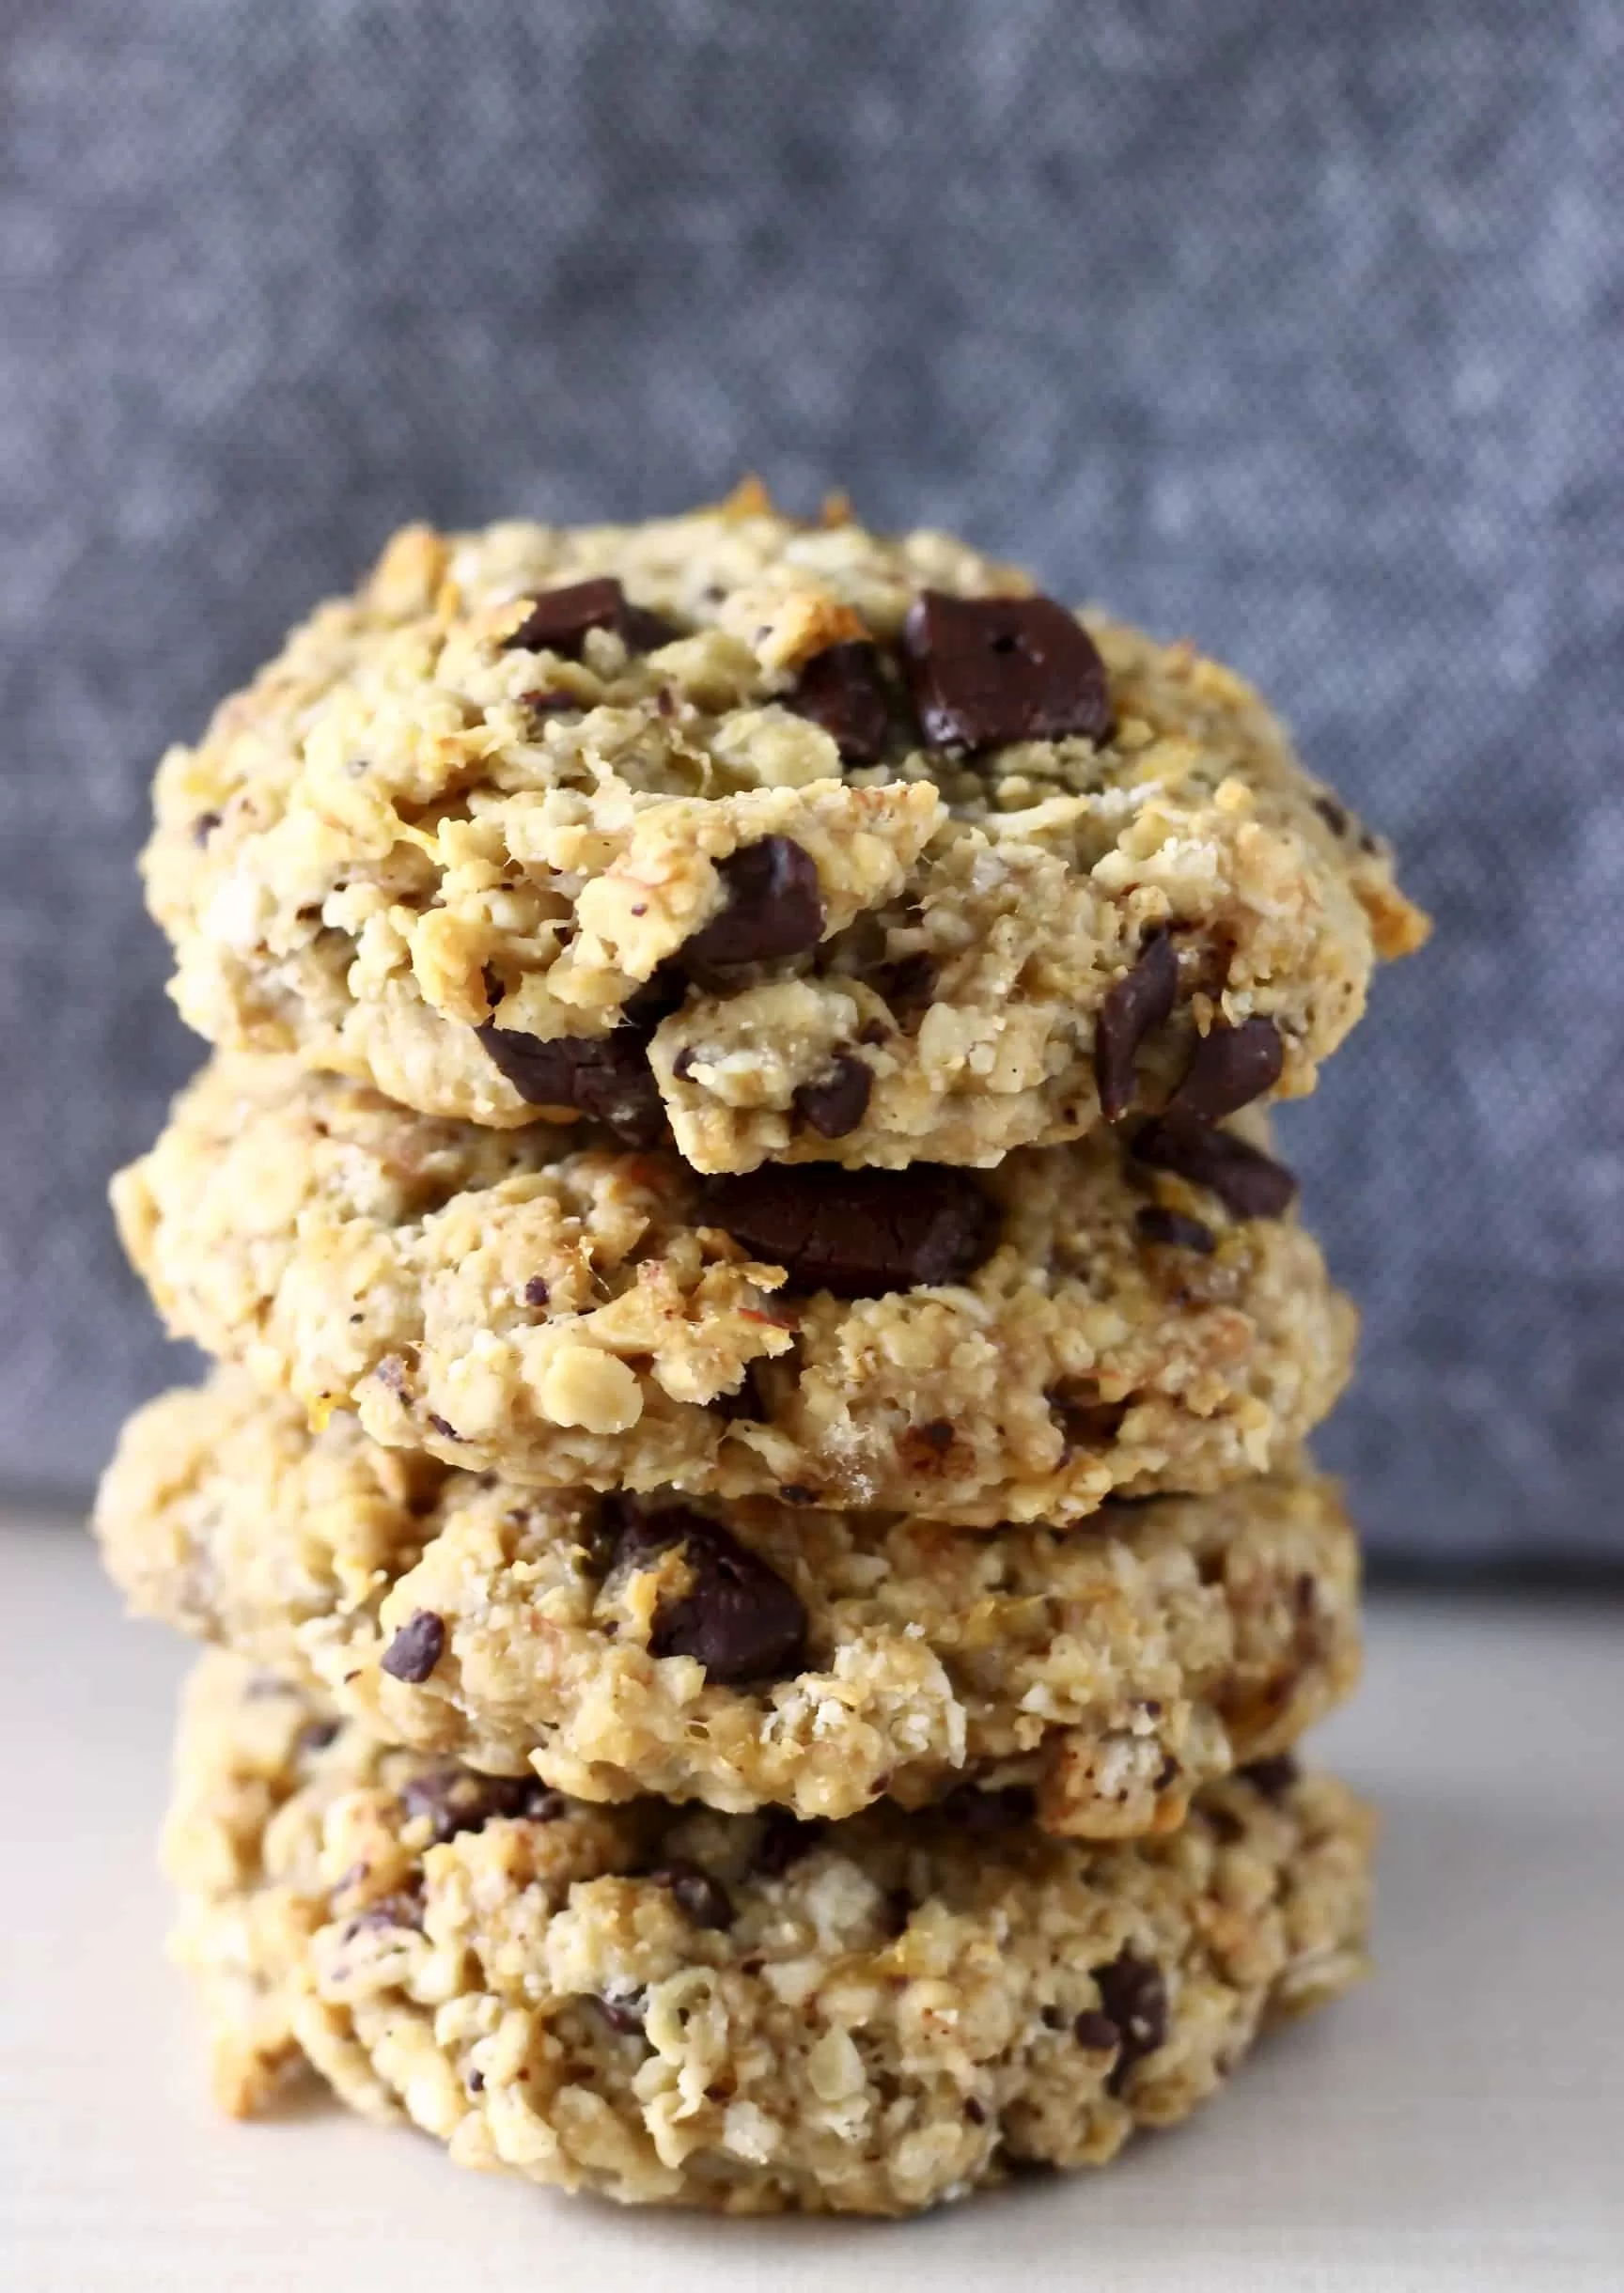 A stack of four gluten-free vegan banana oatmeal cookies with chocolate chips